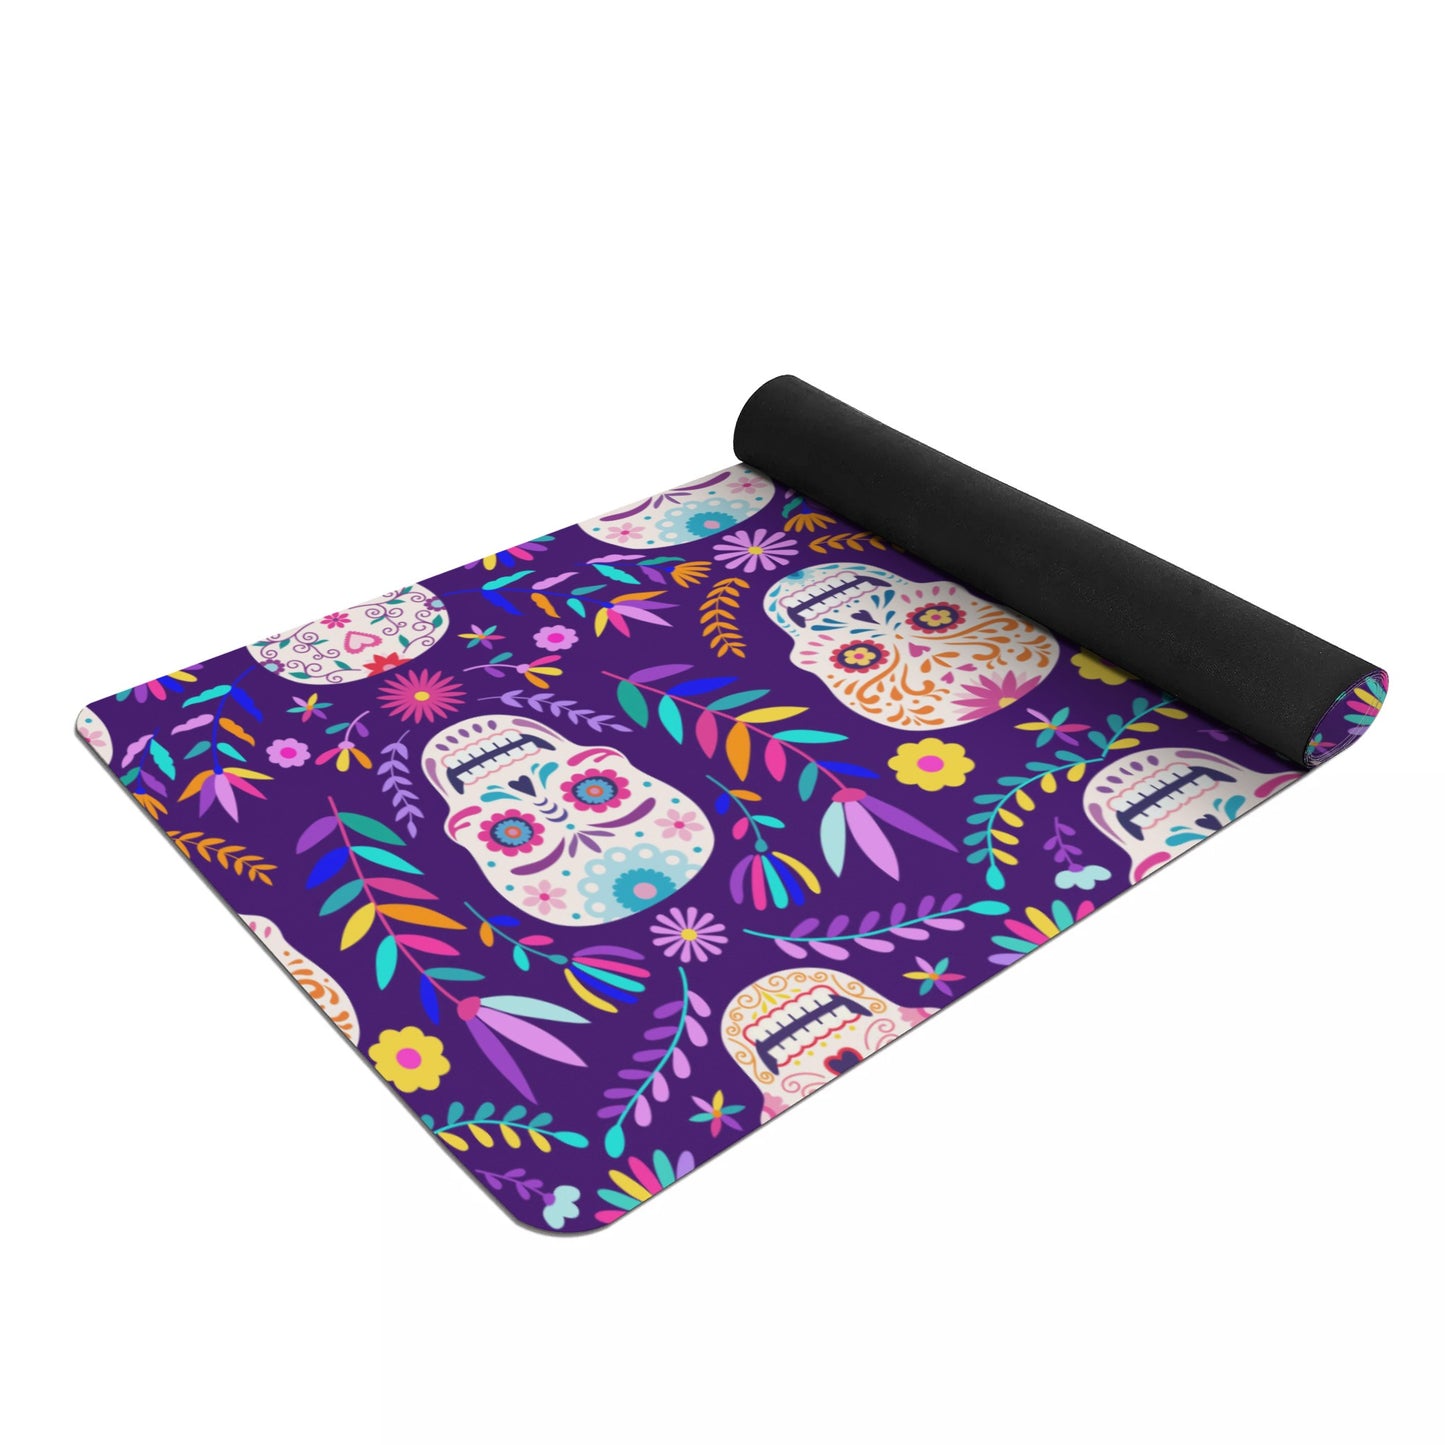 Day of the dead mexican skull sothic Rubber Yoga Mat